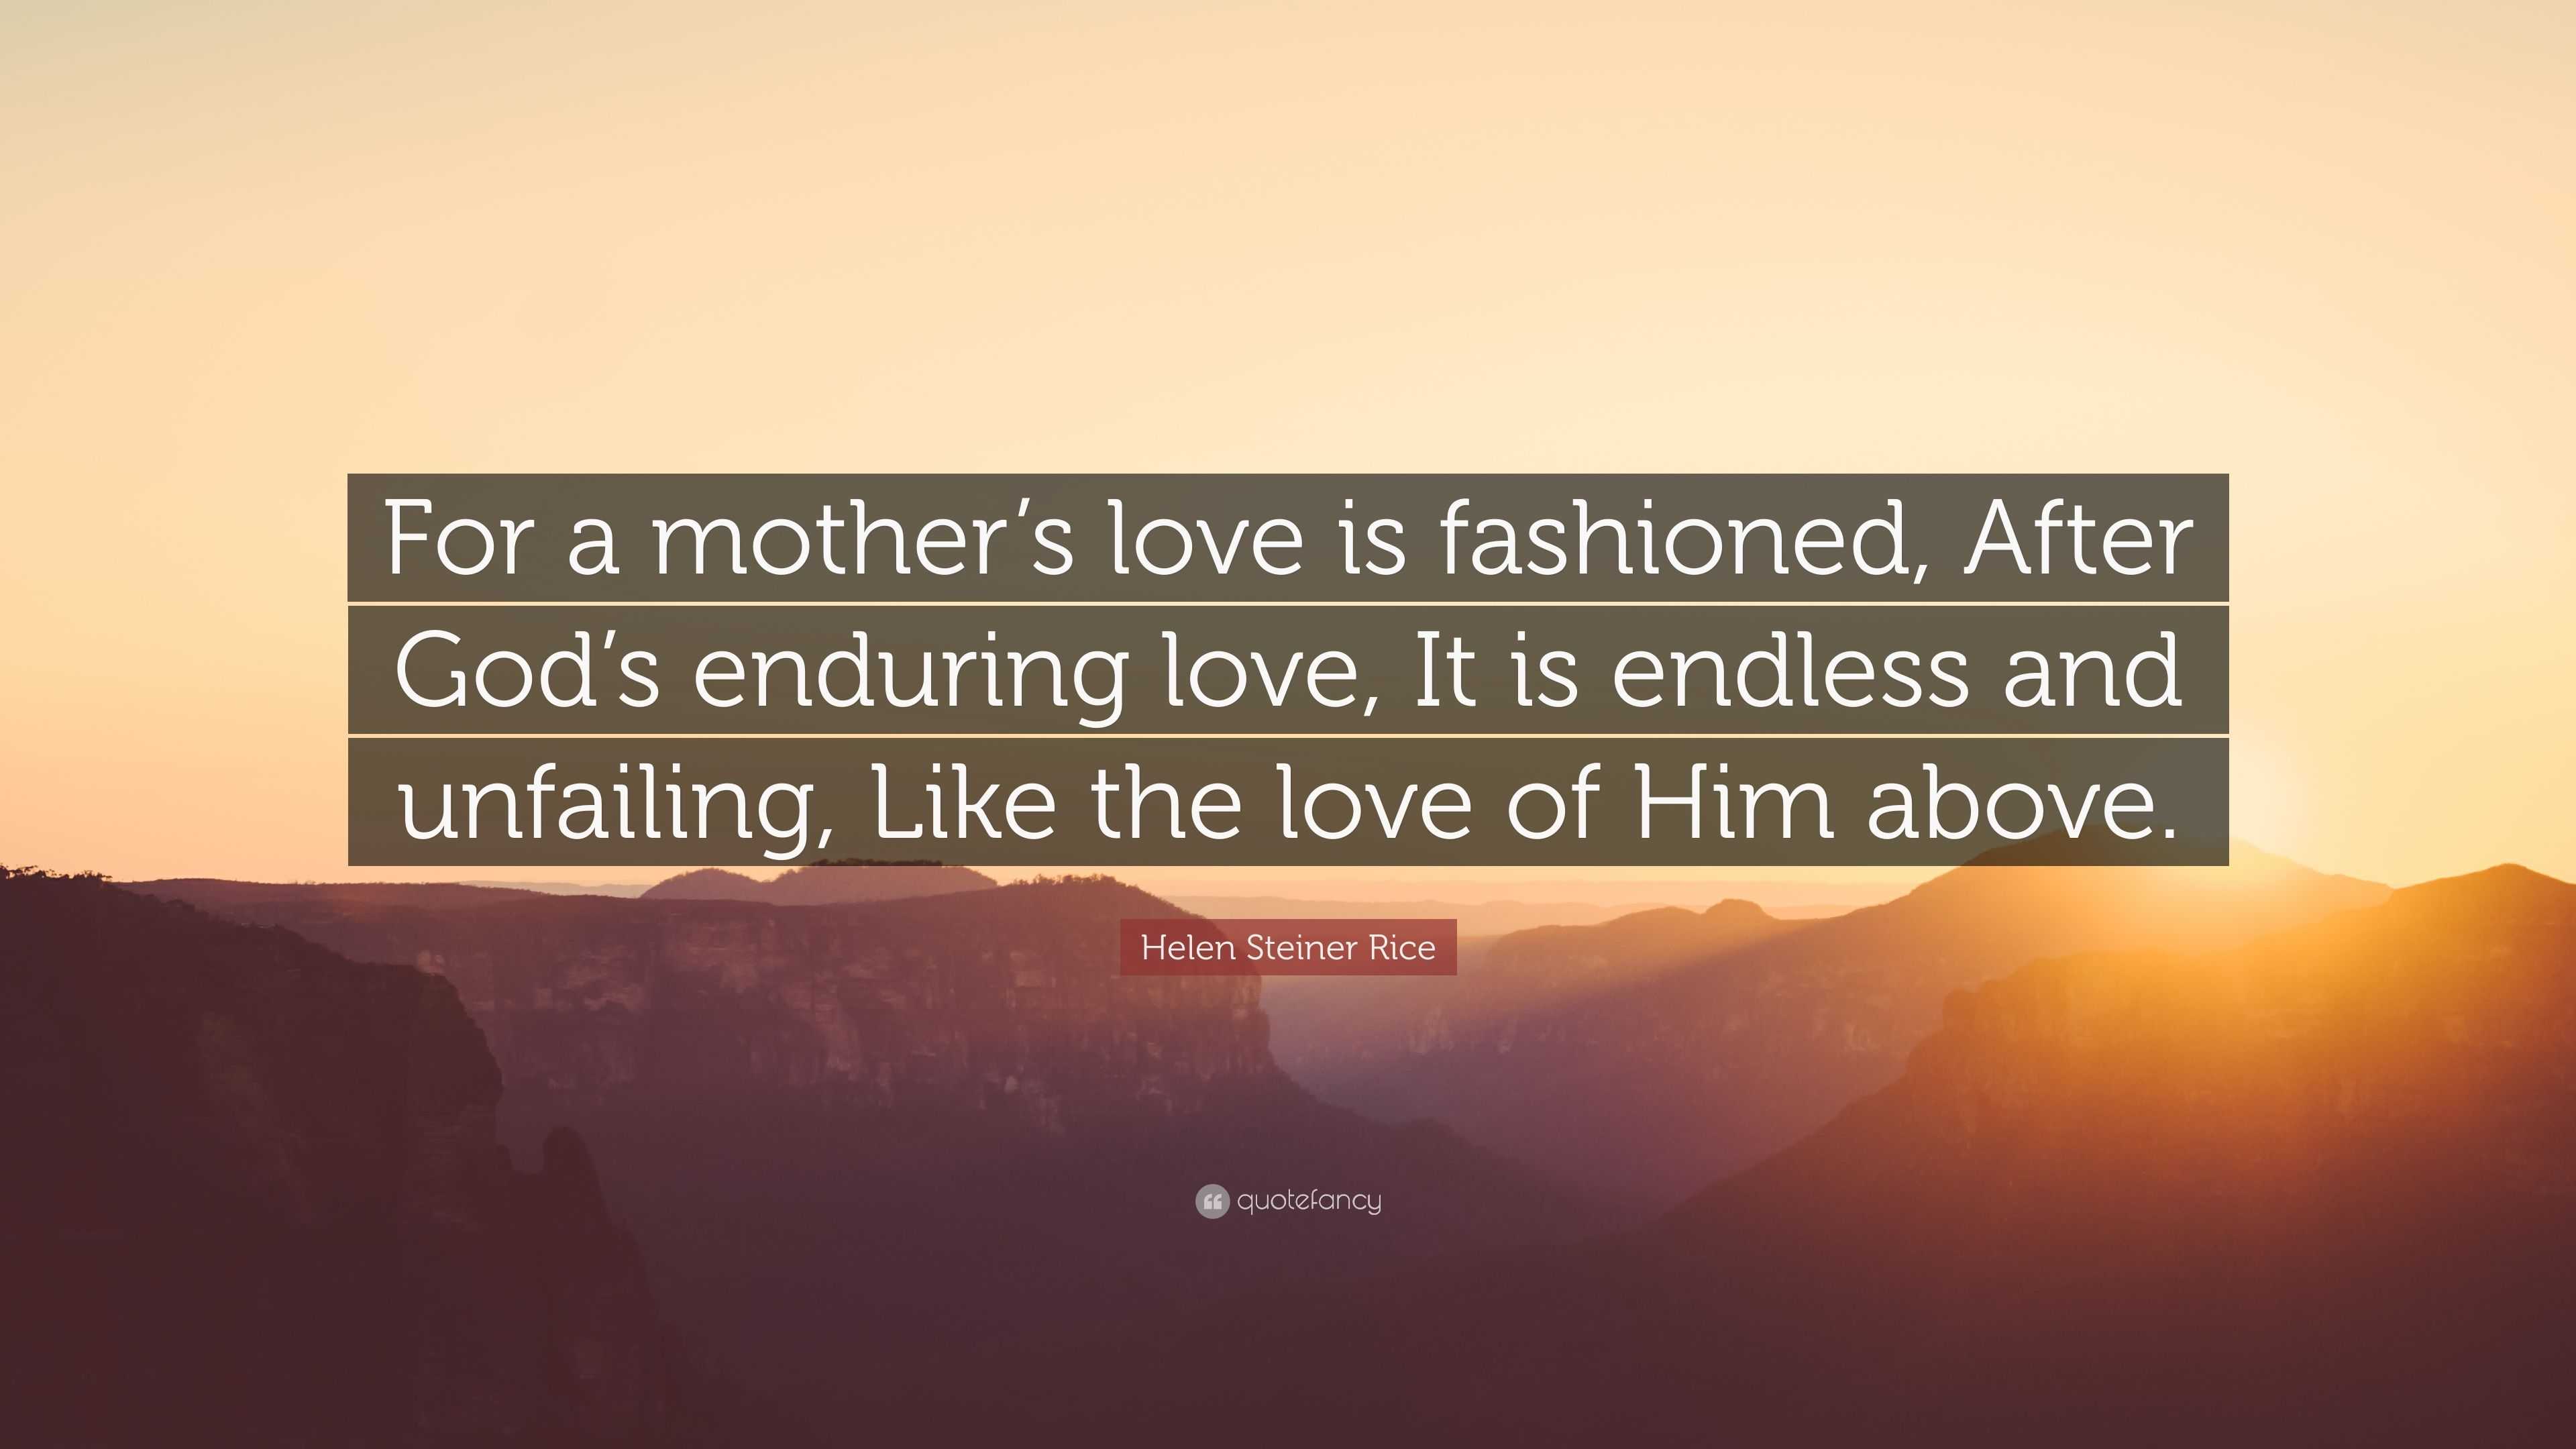 Helen Steiner Rice Quote “For a mother’s love is fashioned, After God